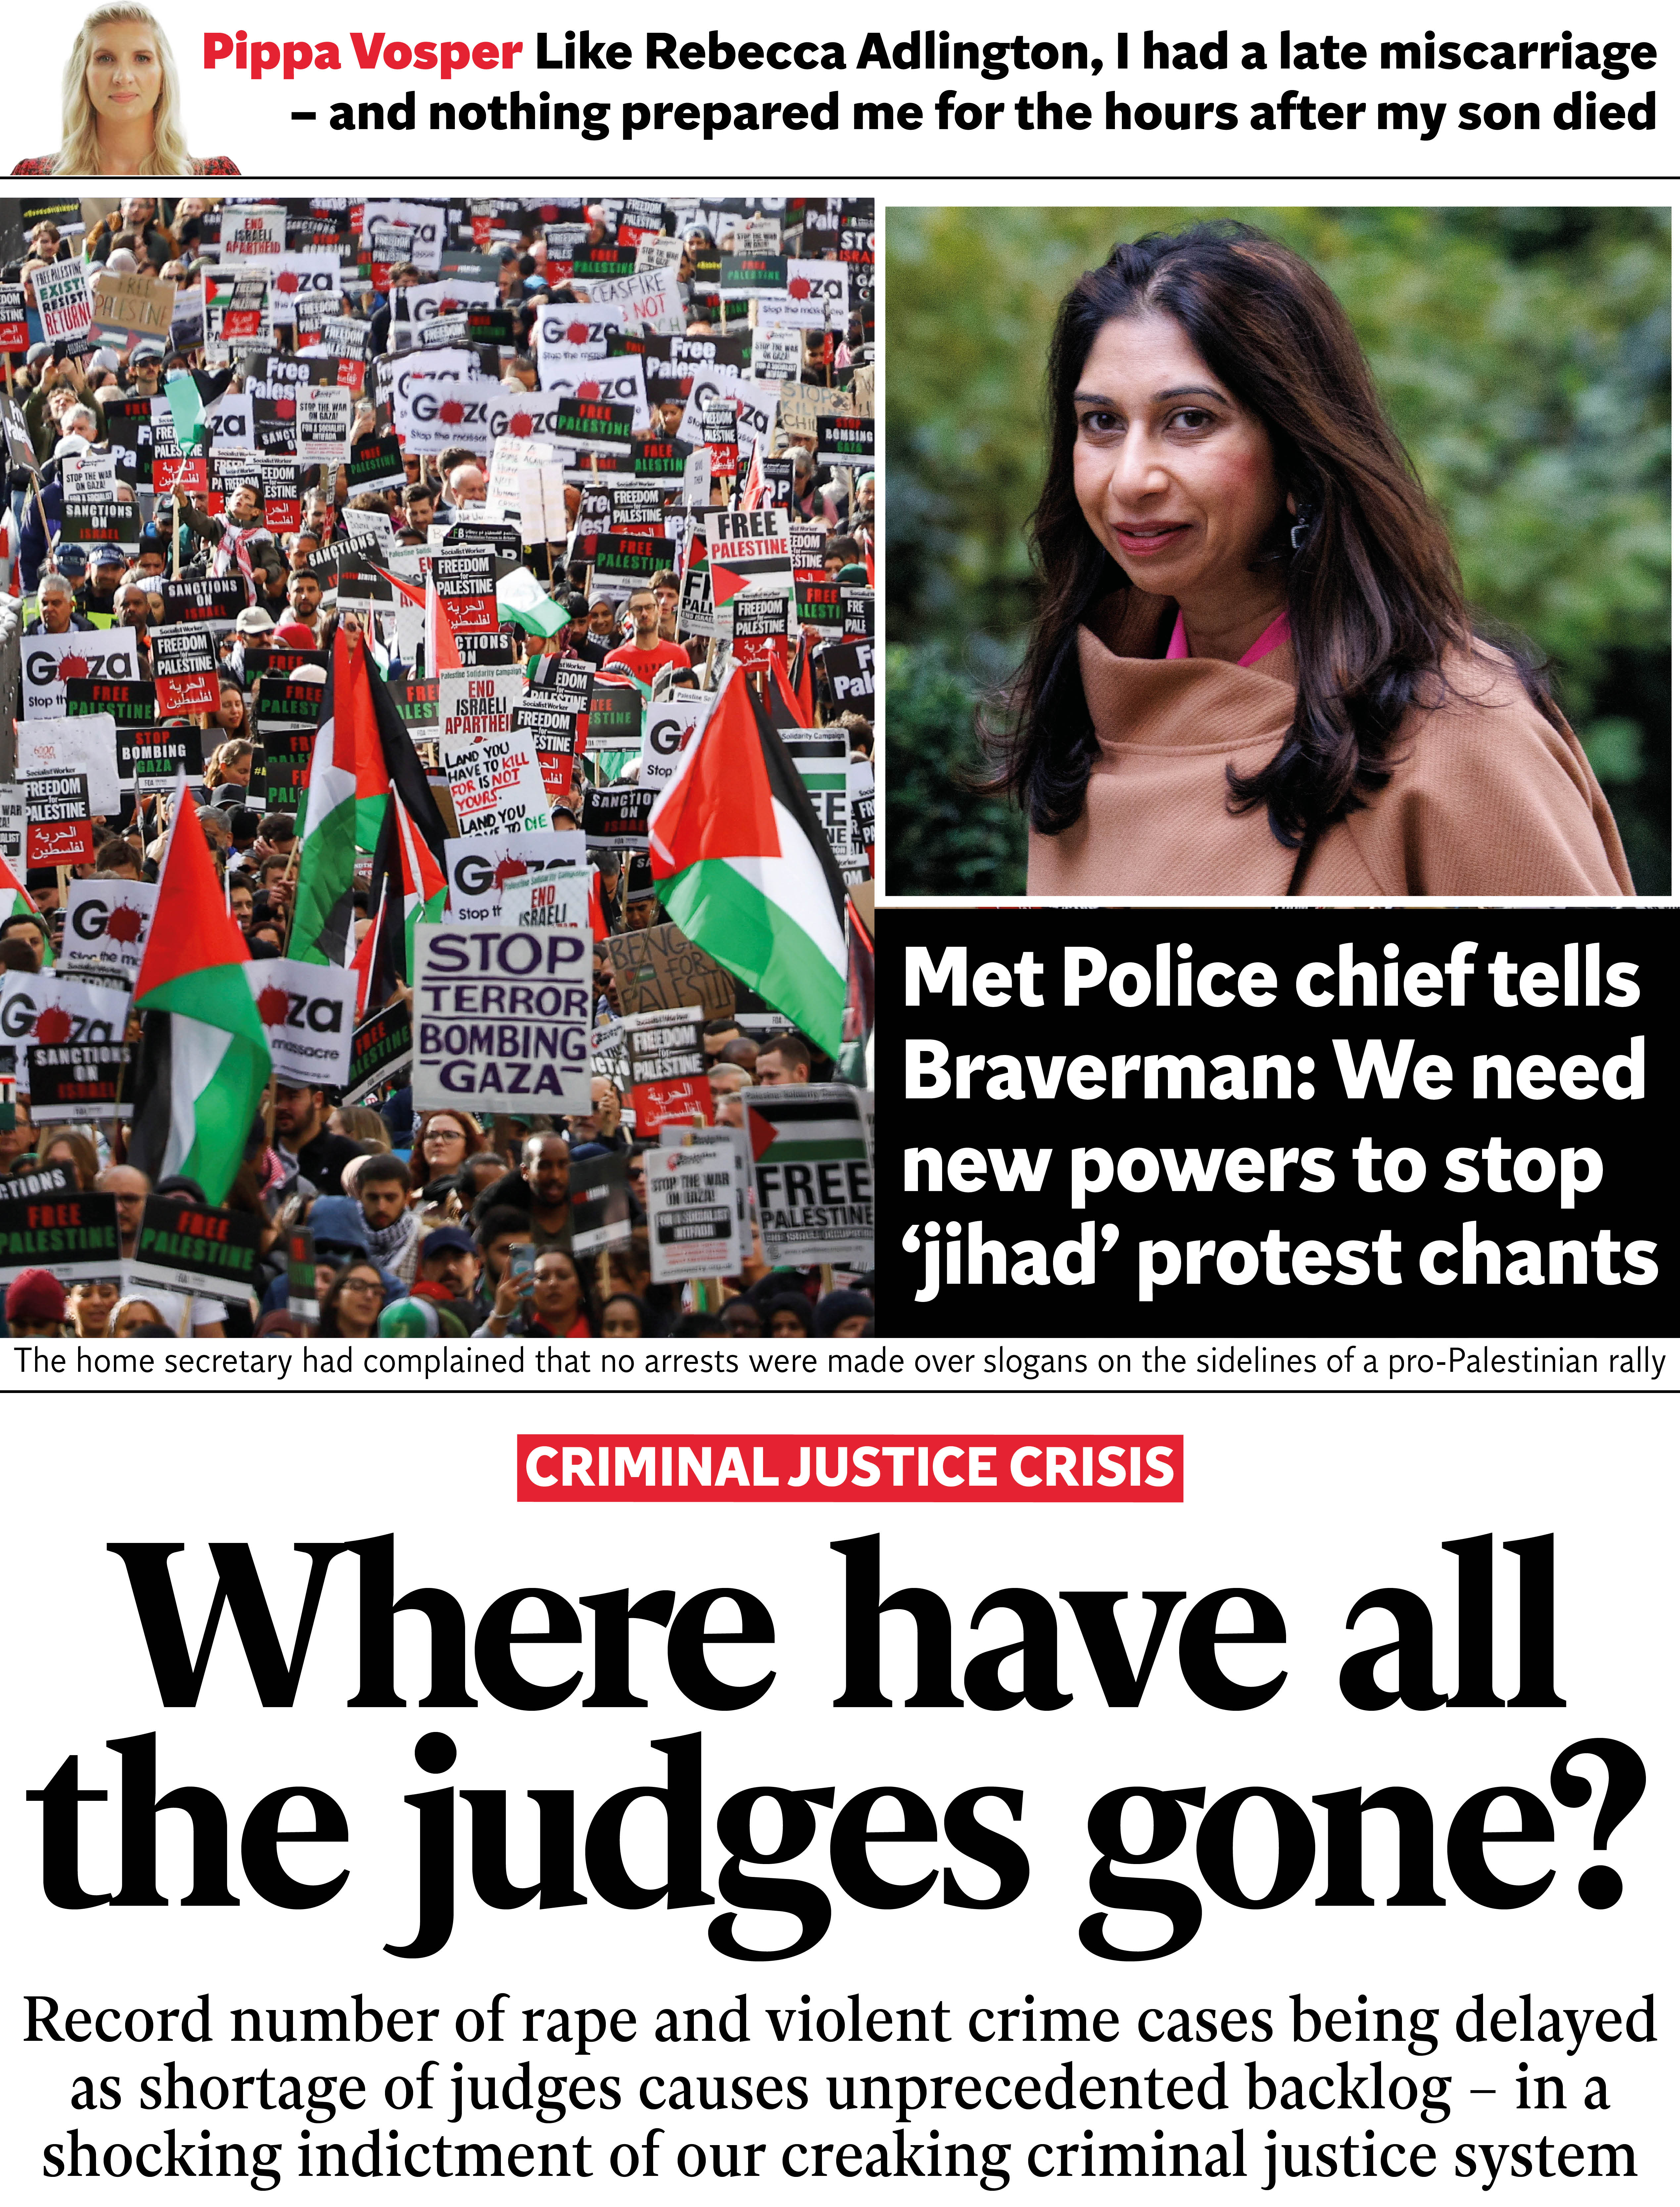 The Independent has previously highlighted the record number of trials impacted by judge shortages